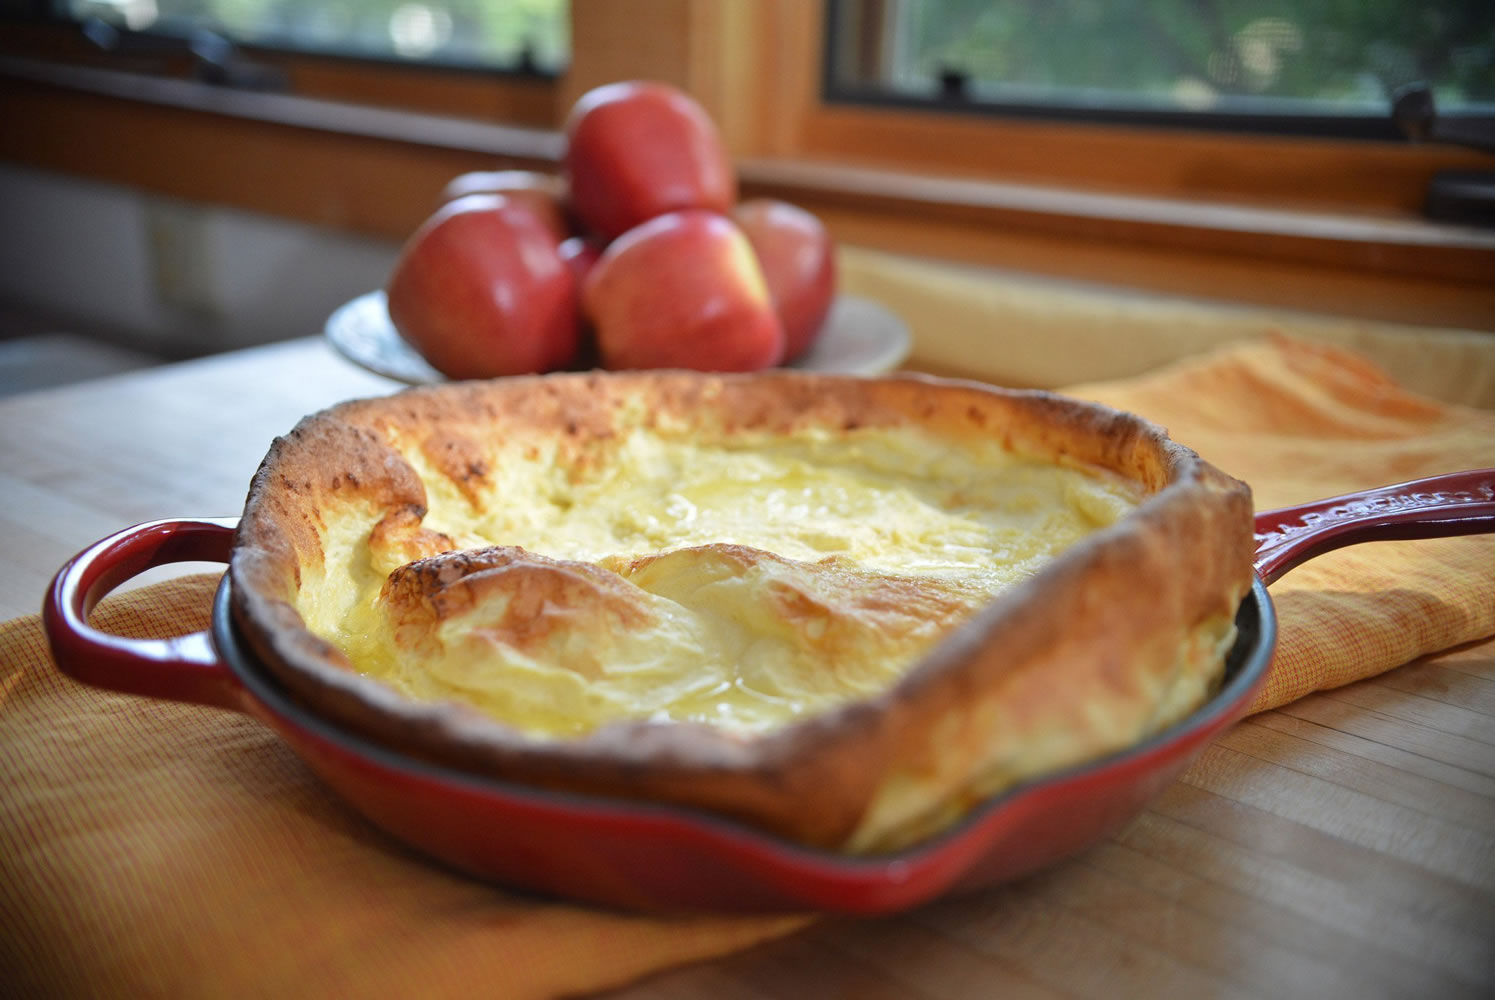 A theatrically puffed German pancake is a delicious way to lend some fun to a celebratory brunch or a simple breakfast.